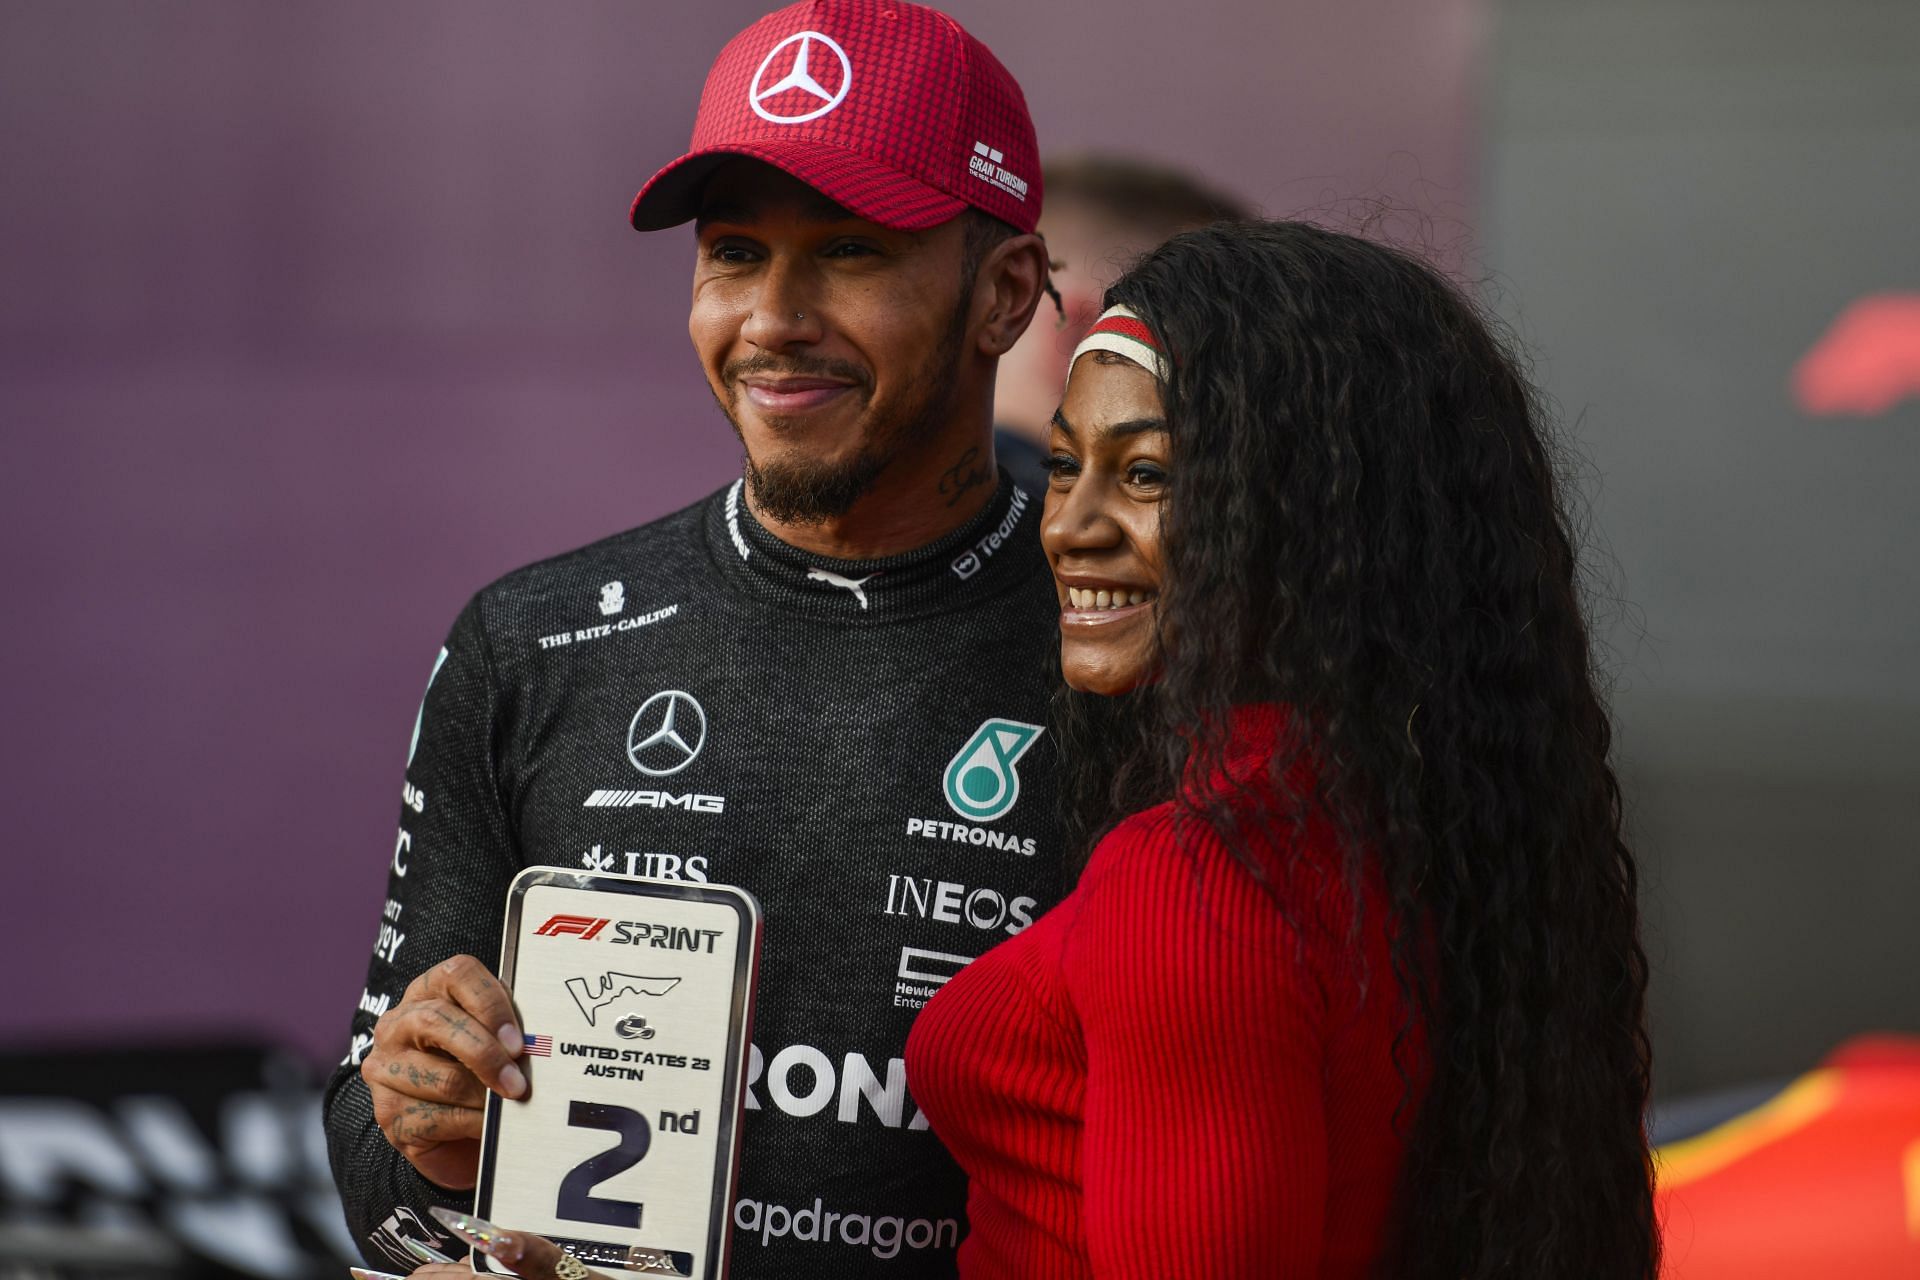 Lewis Hamilton of Great Britain and Mercedes pose for a photo with Sha&#039;Carri Richardson in Parc Ferme after the Sprint ahead of the F1 Grand Prix of United States at Circuit of The Americas in Austin, Texas.